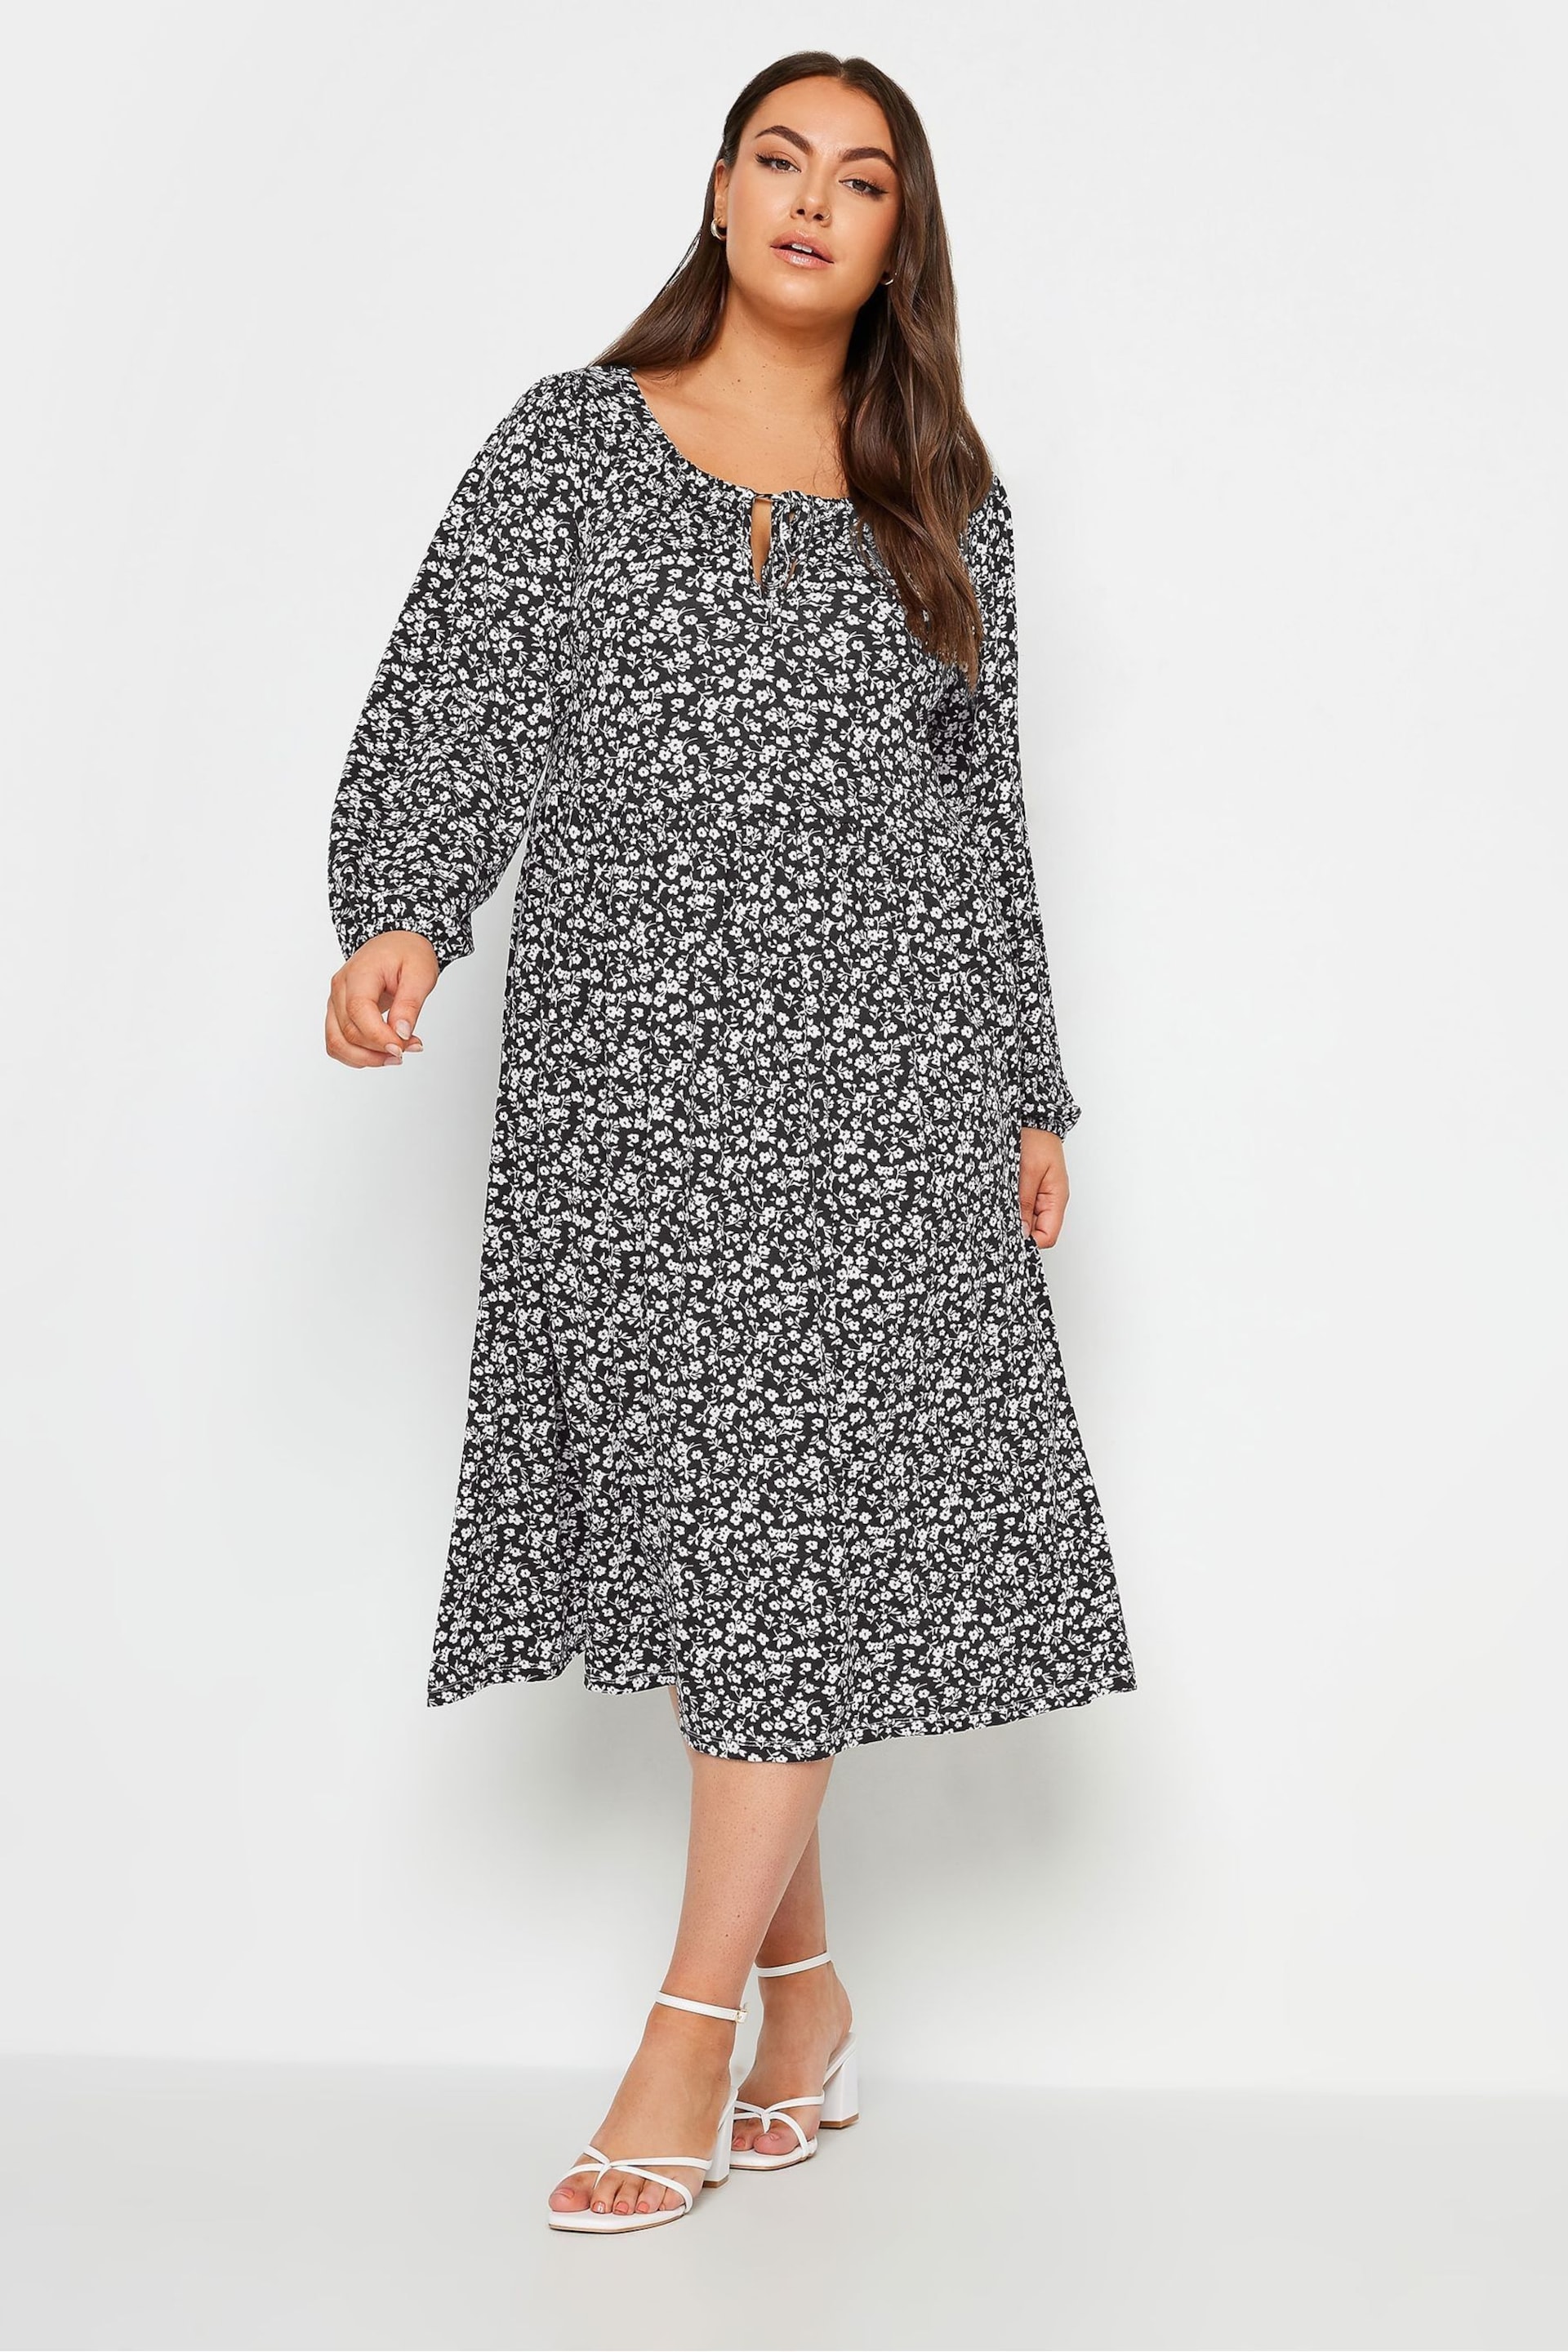 Yours Curve Black Ditsy Floral Print Midaxi Dress - Image 2 of 4